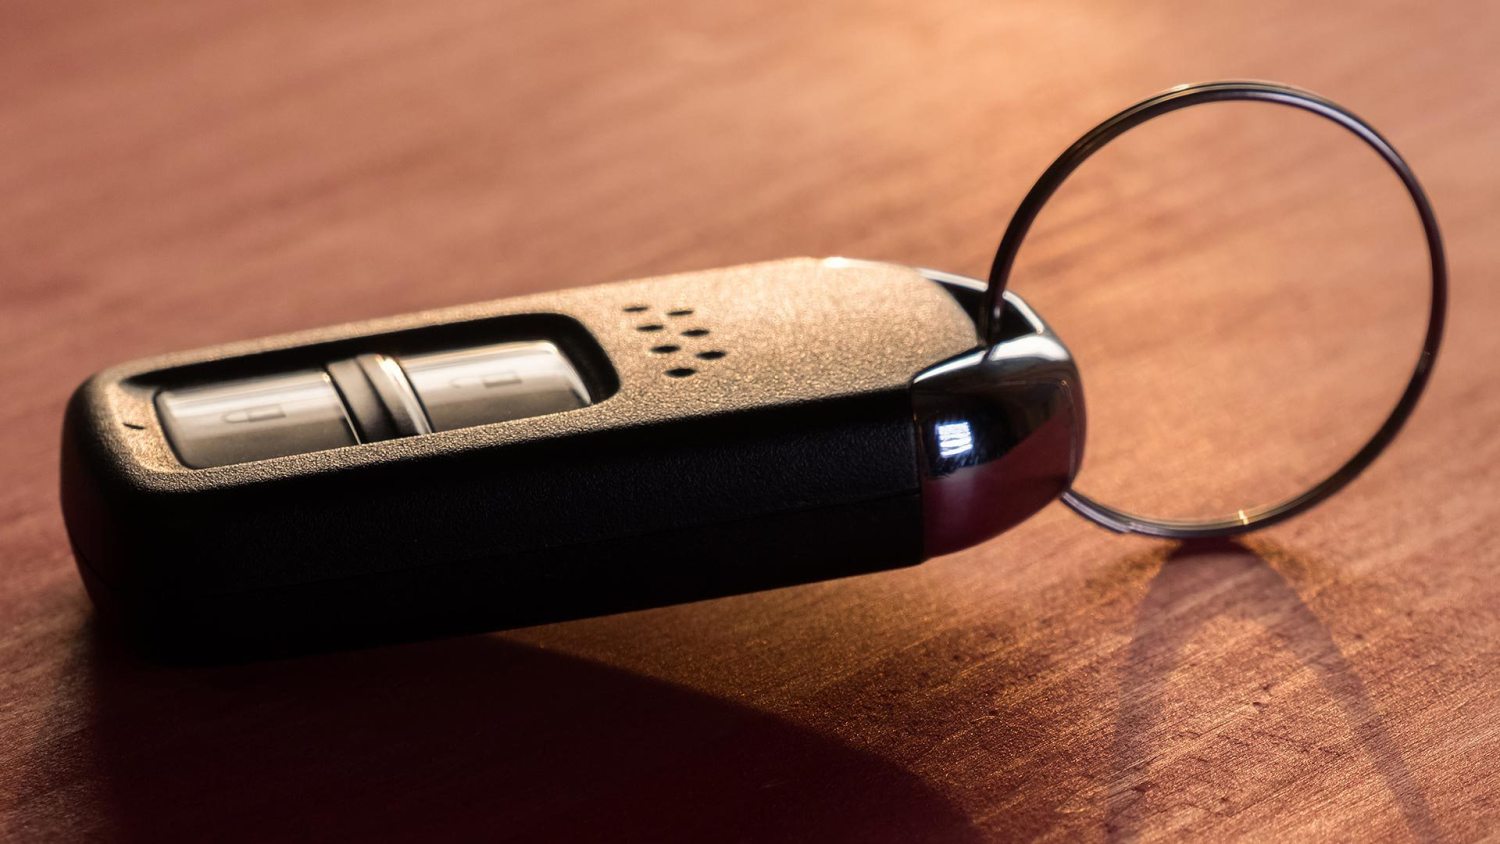 Key fob security How Drivers Can Protect Their Data